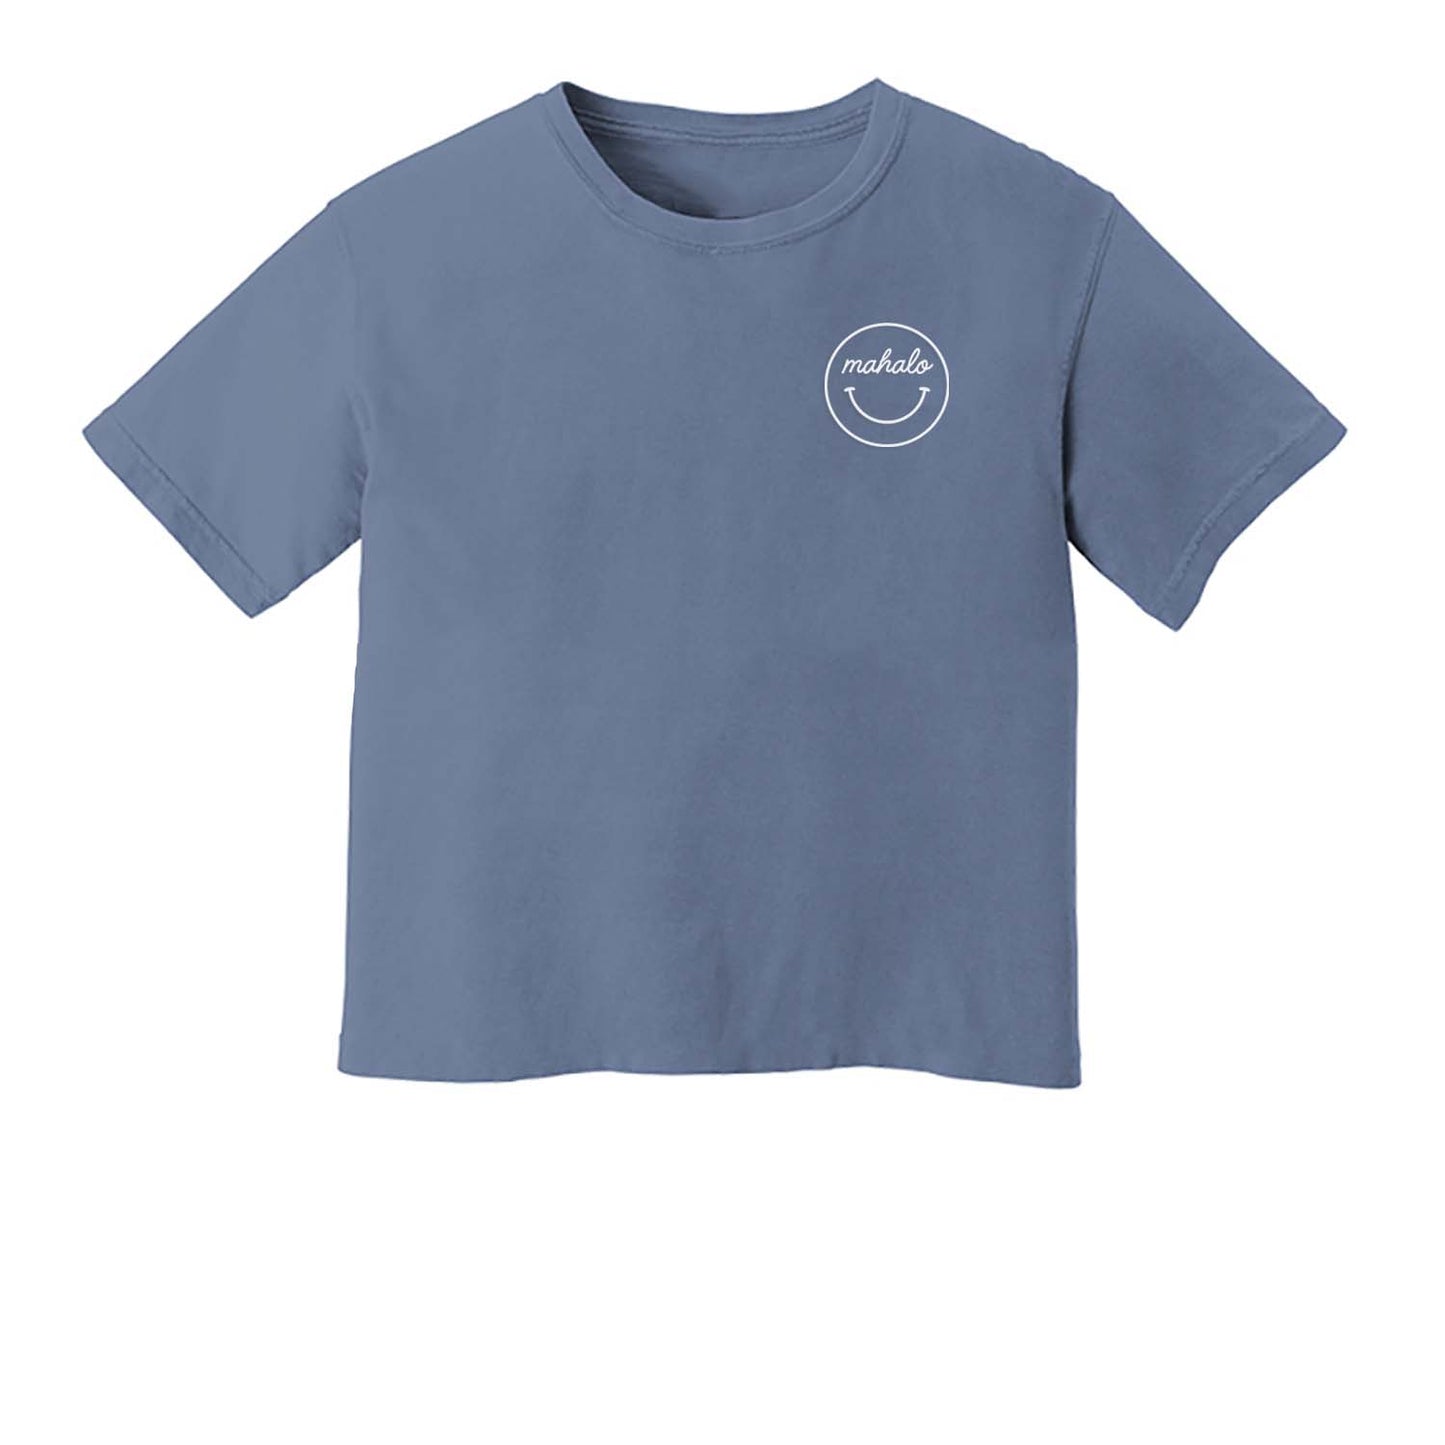 Mahalo Smiley Face Washed Crop Tee